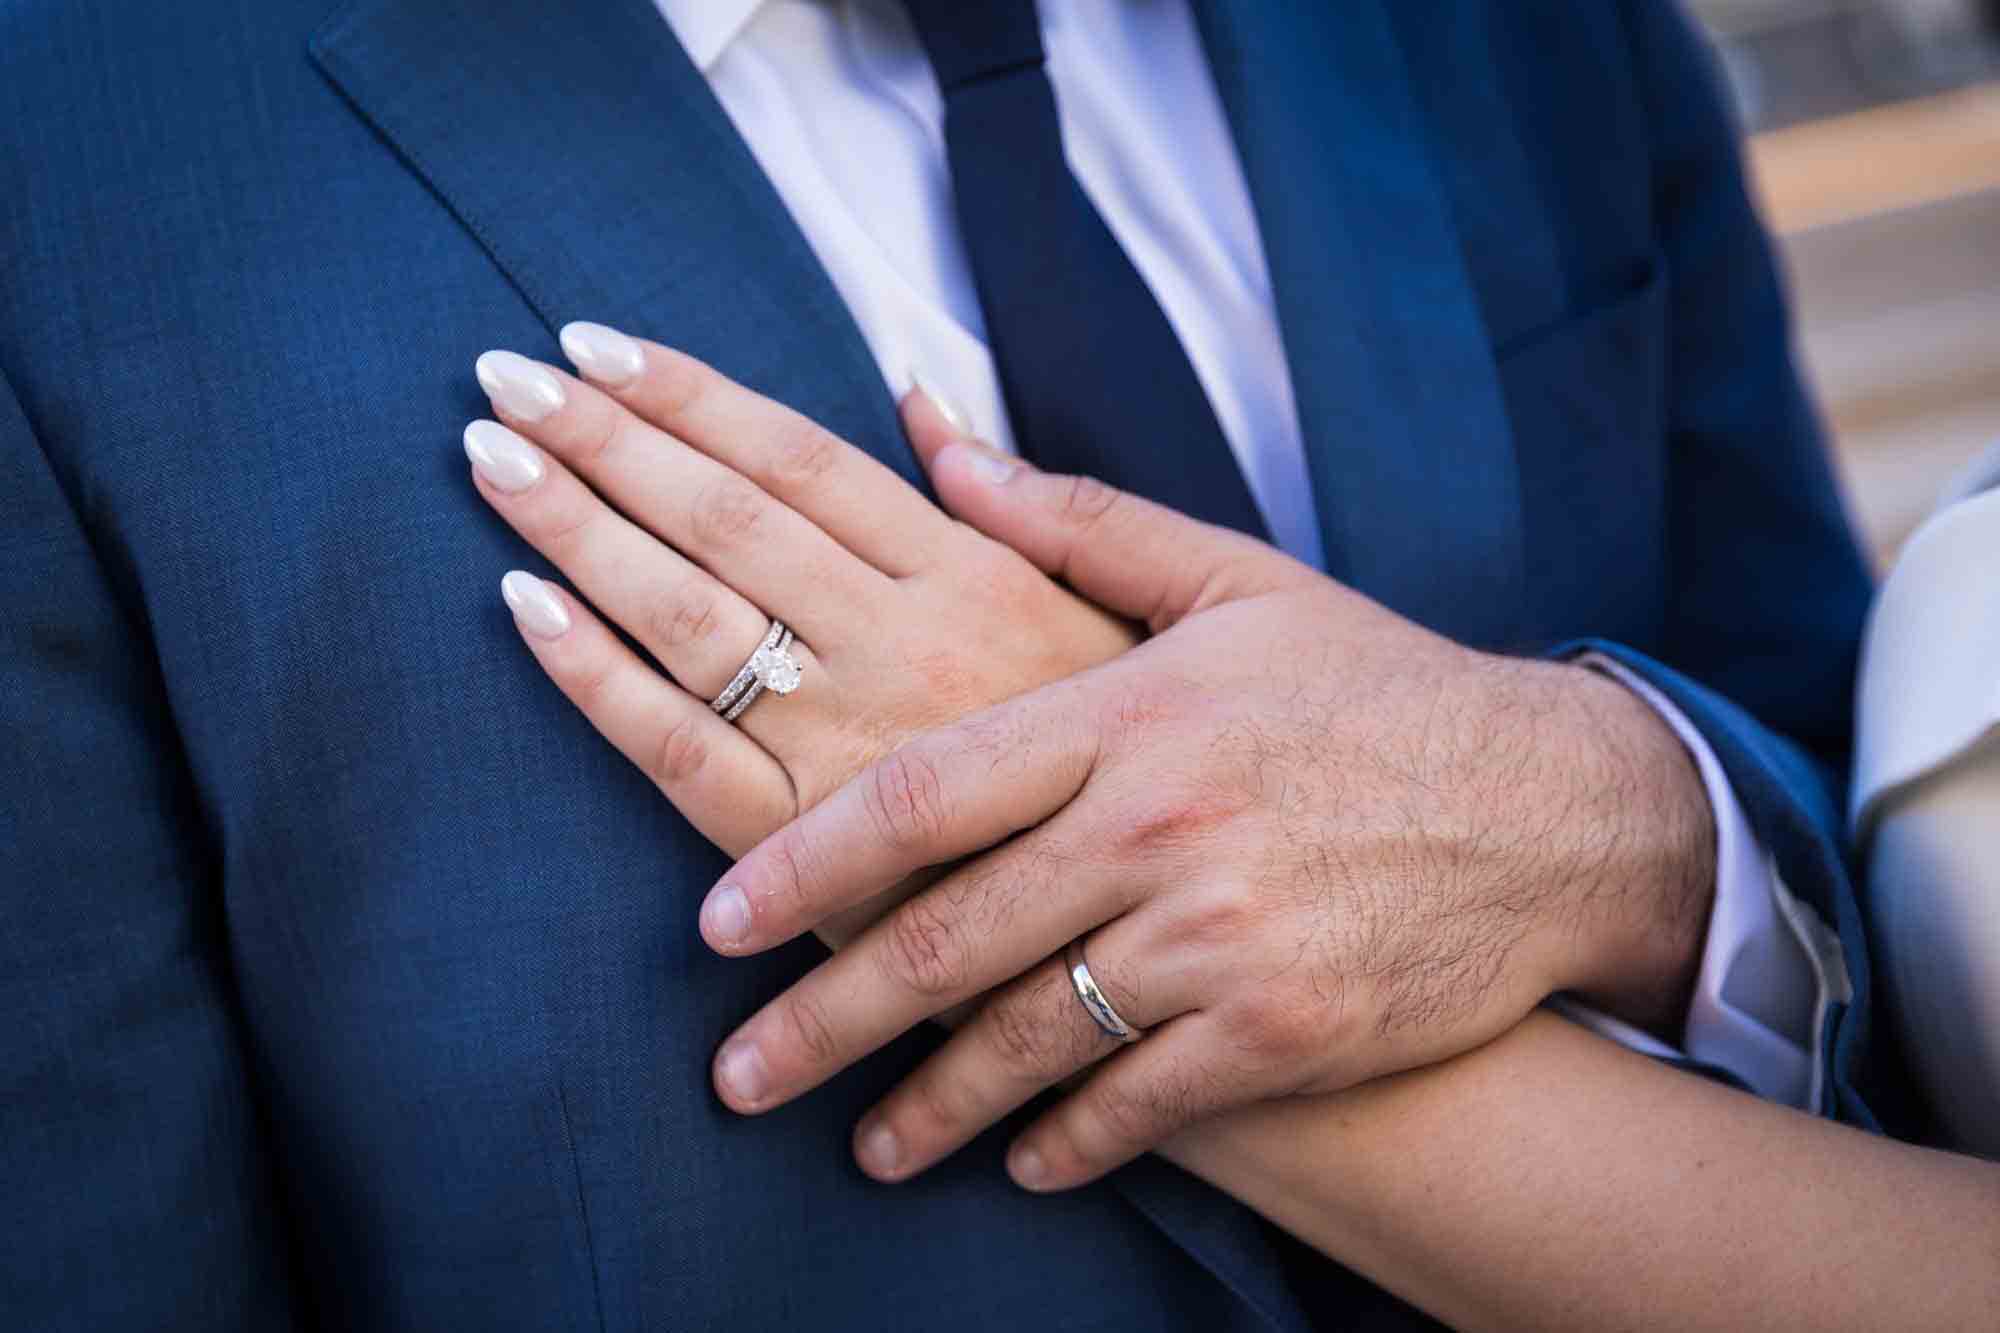 Close up of bride and groom's hands wearing wedding rings held on man's blue jacket